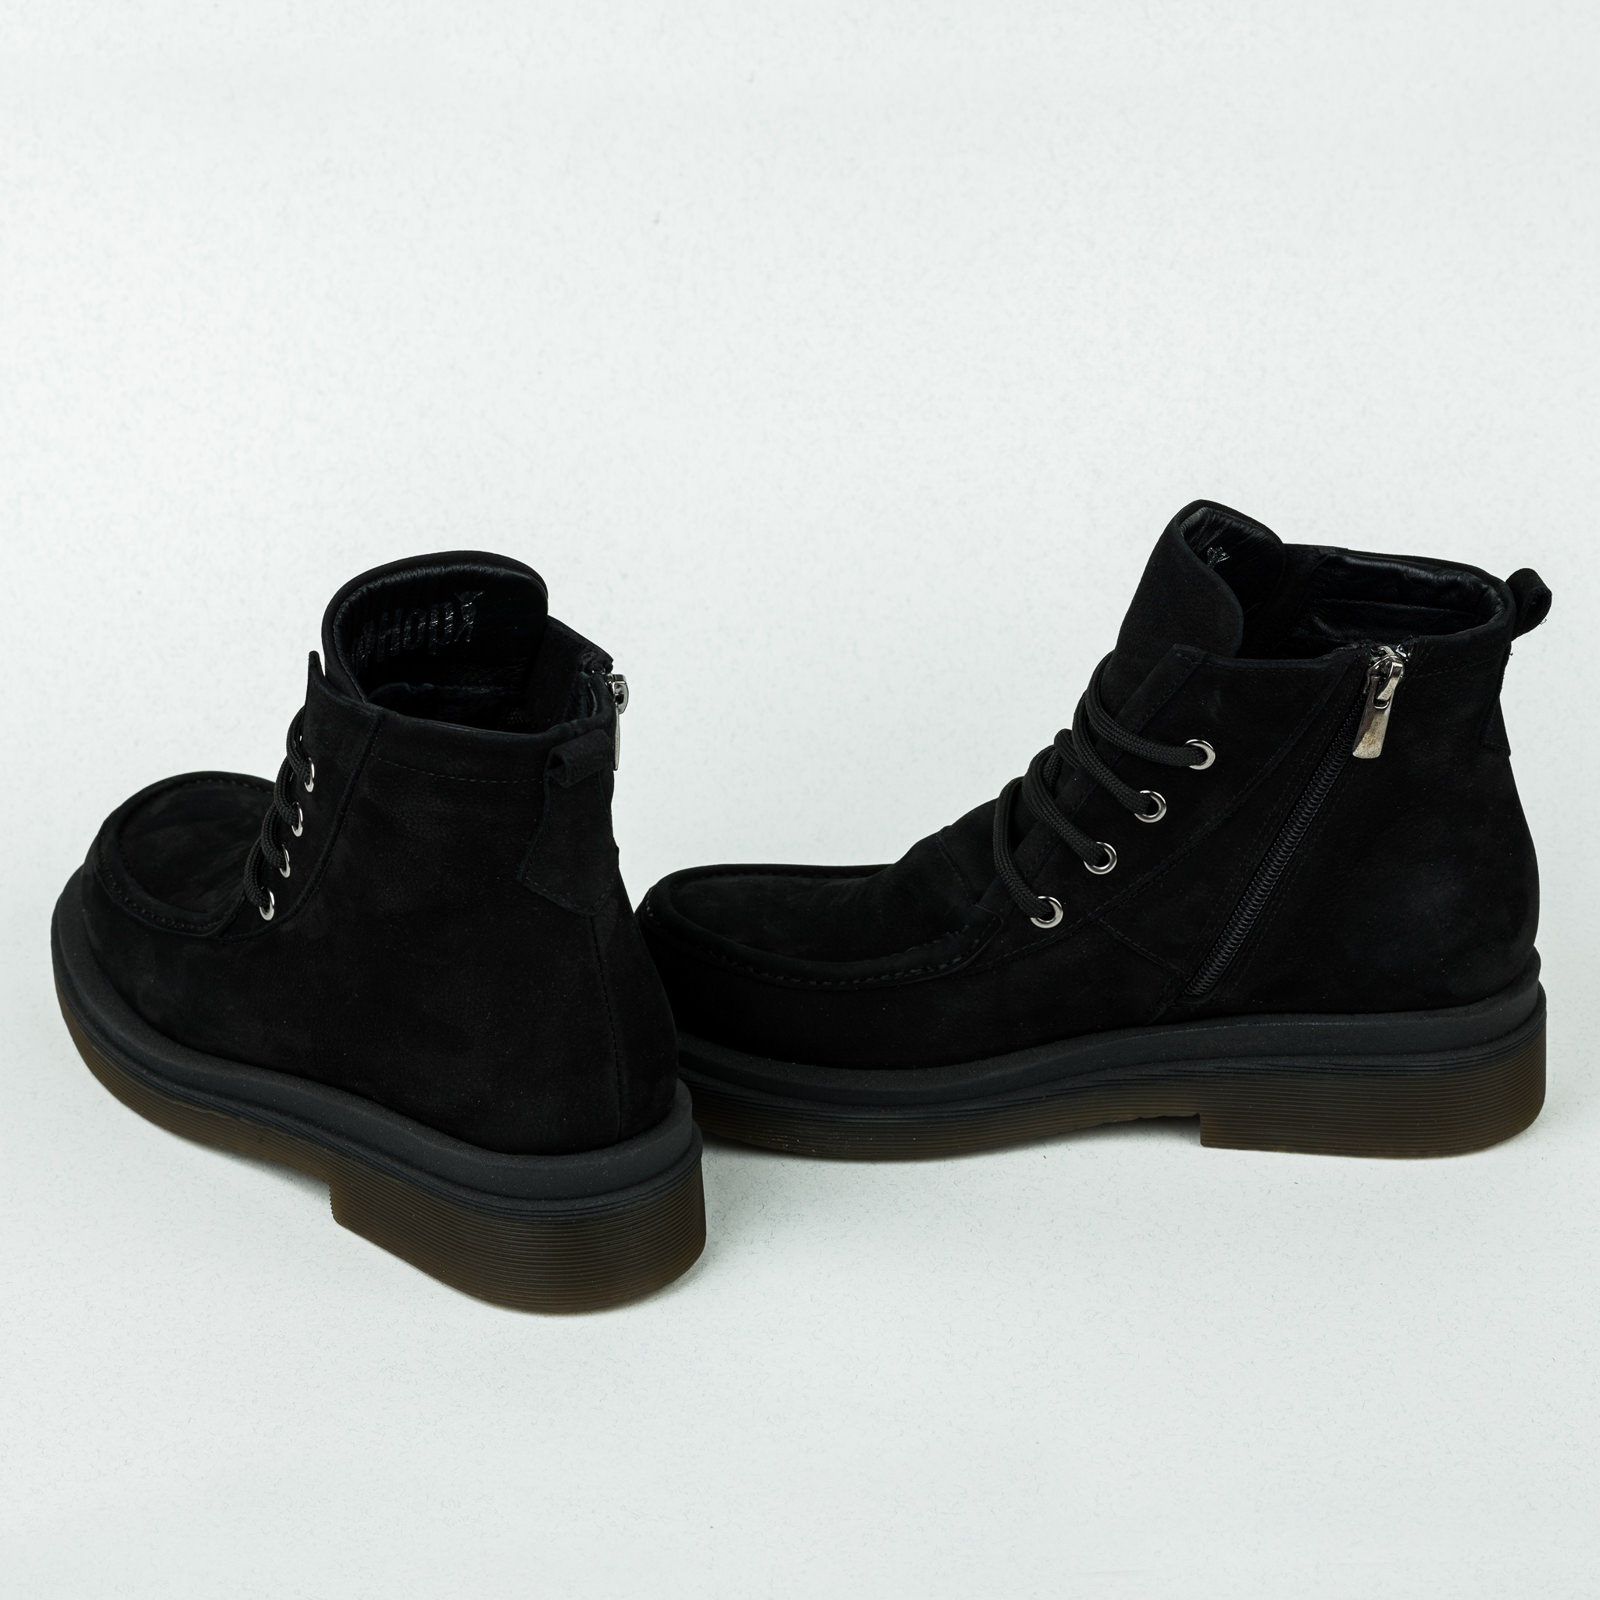 Leather ankle boots B057 - BLACK